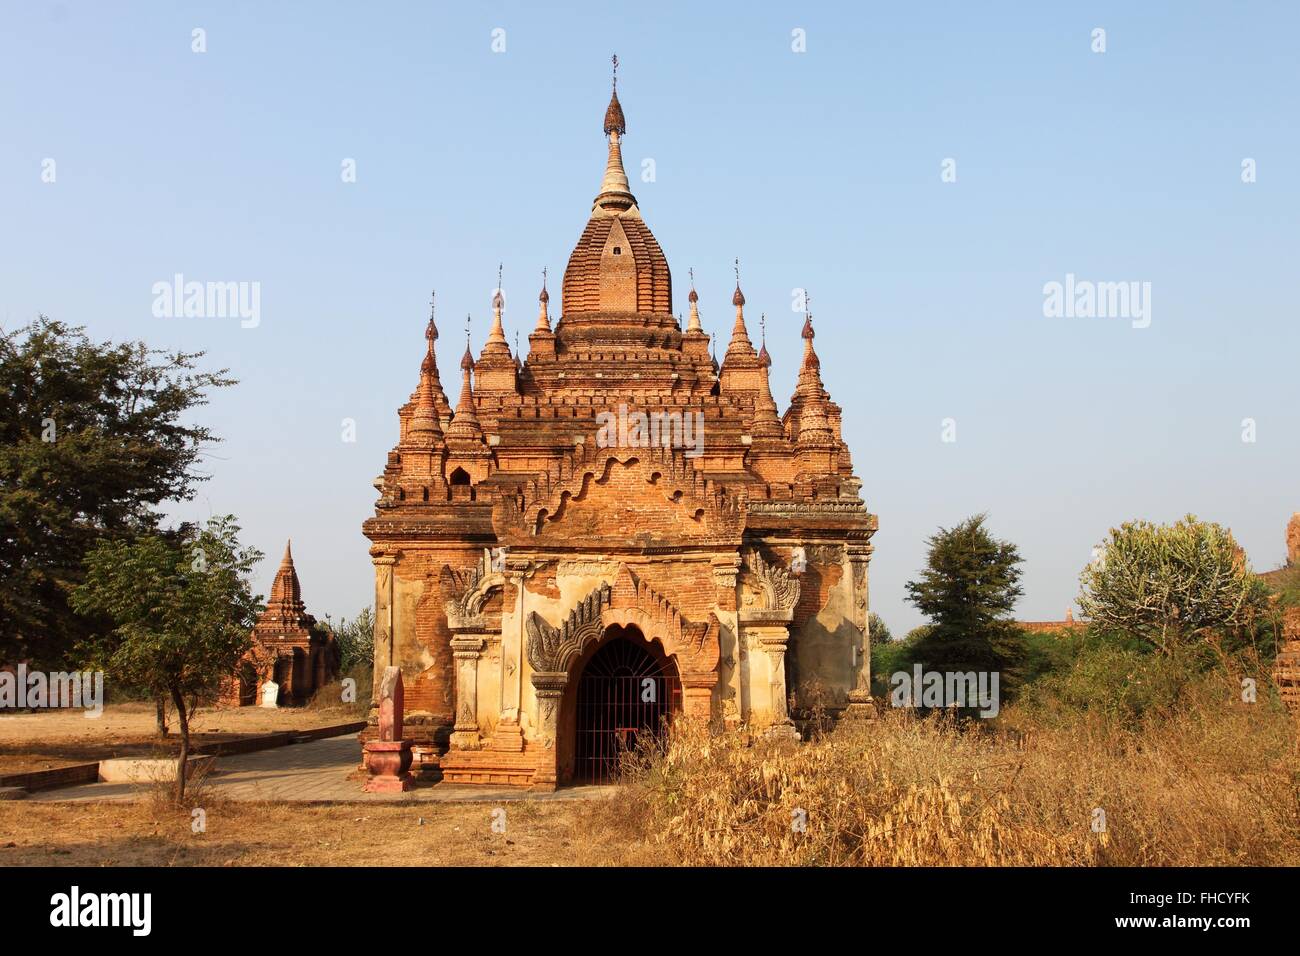 old Buddhist temples and pagodas in Bagan, Myanmar Stock Photo